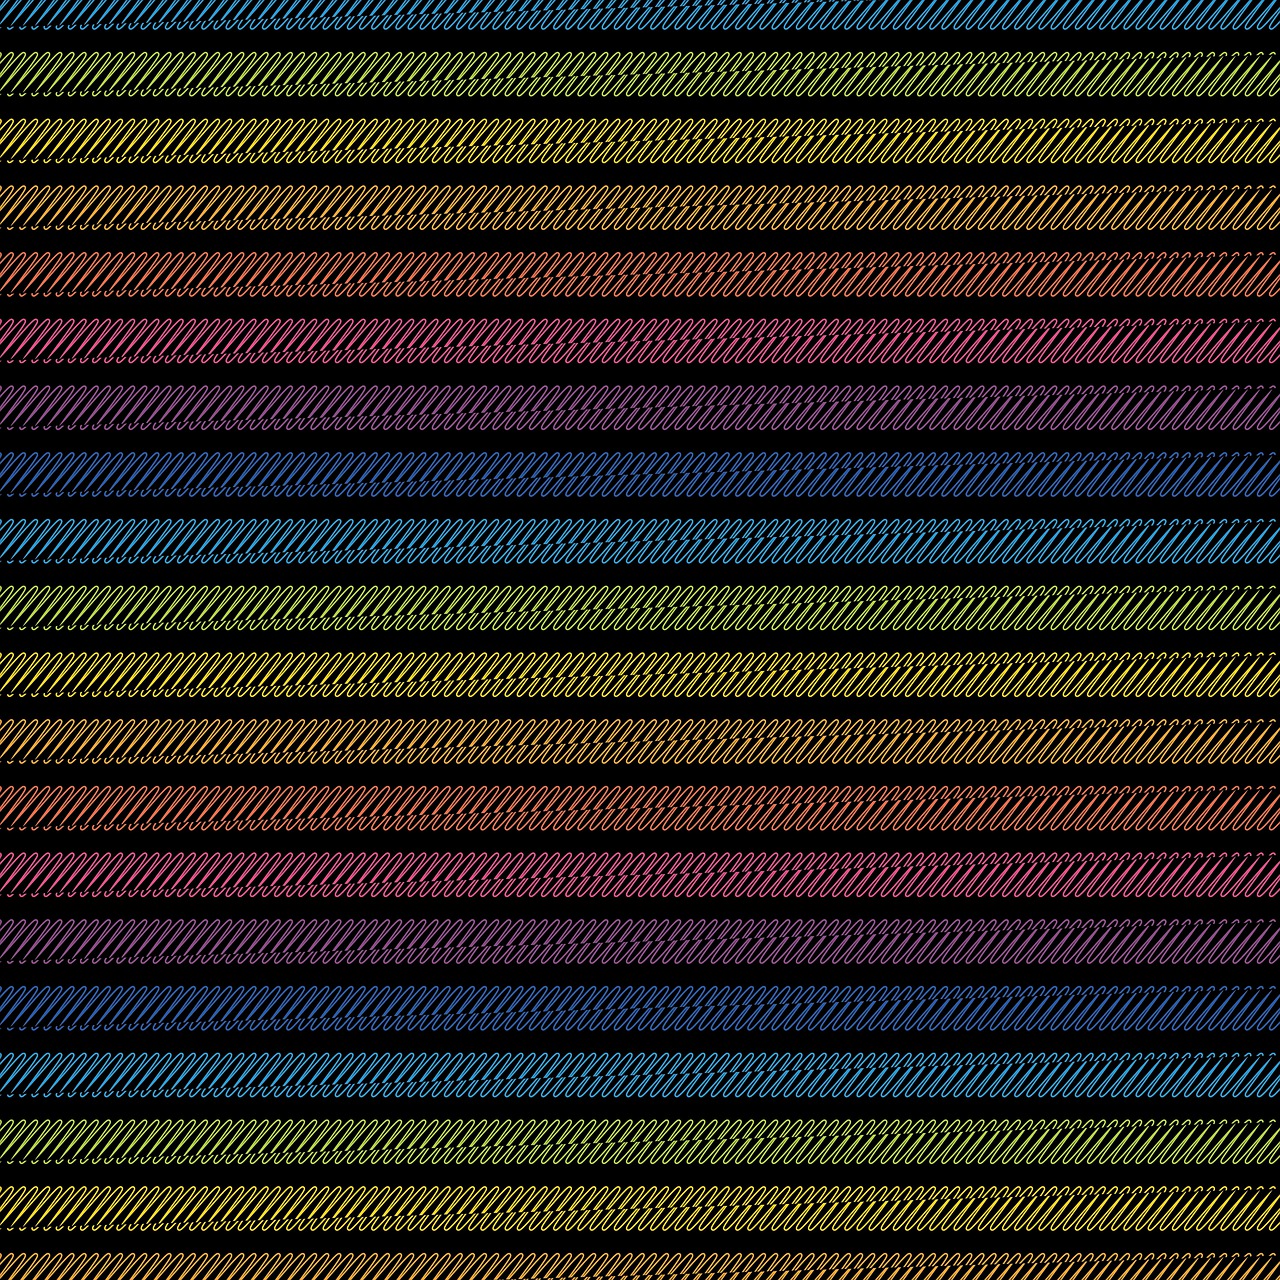 a multicolored striped pattern on a black background, inspired by Lorentz Frölich, op art, lined up horizontally, crosshatch sketch gradient, several layers of fabric, muted dark colors